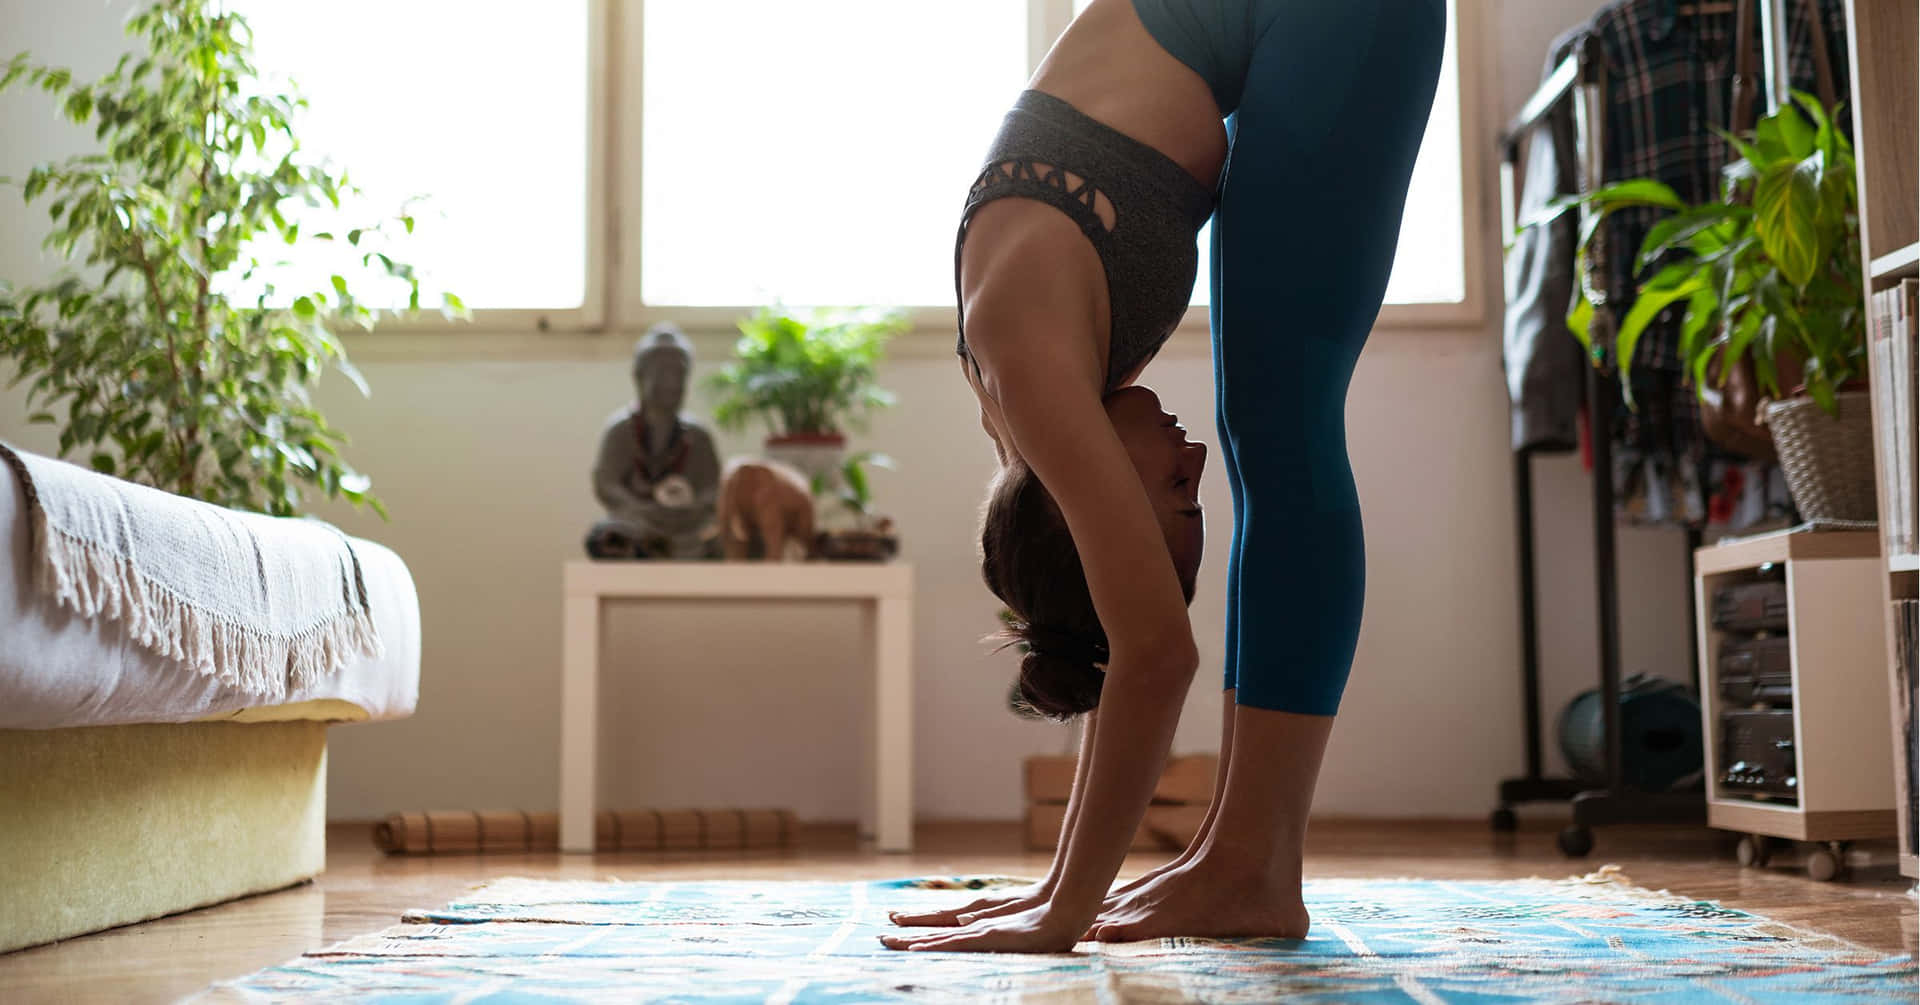 A Woman Doing Yoga In Her Bedroom Wallpaper